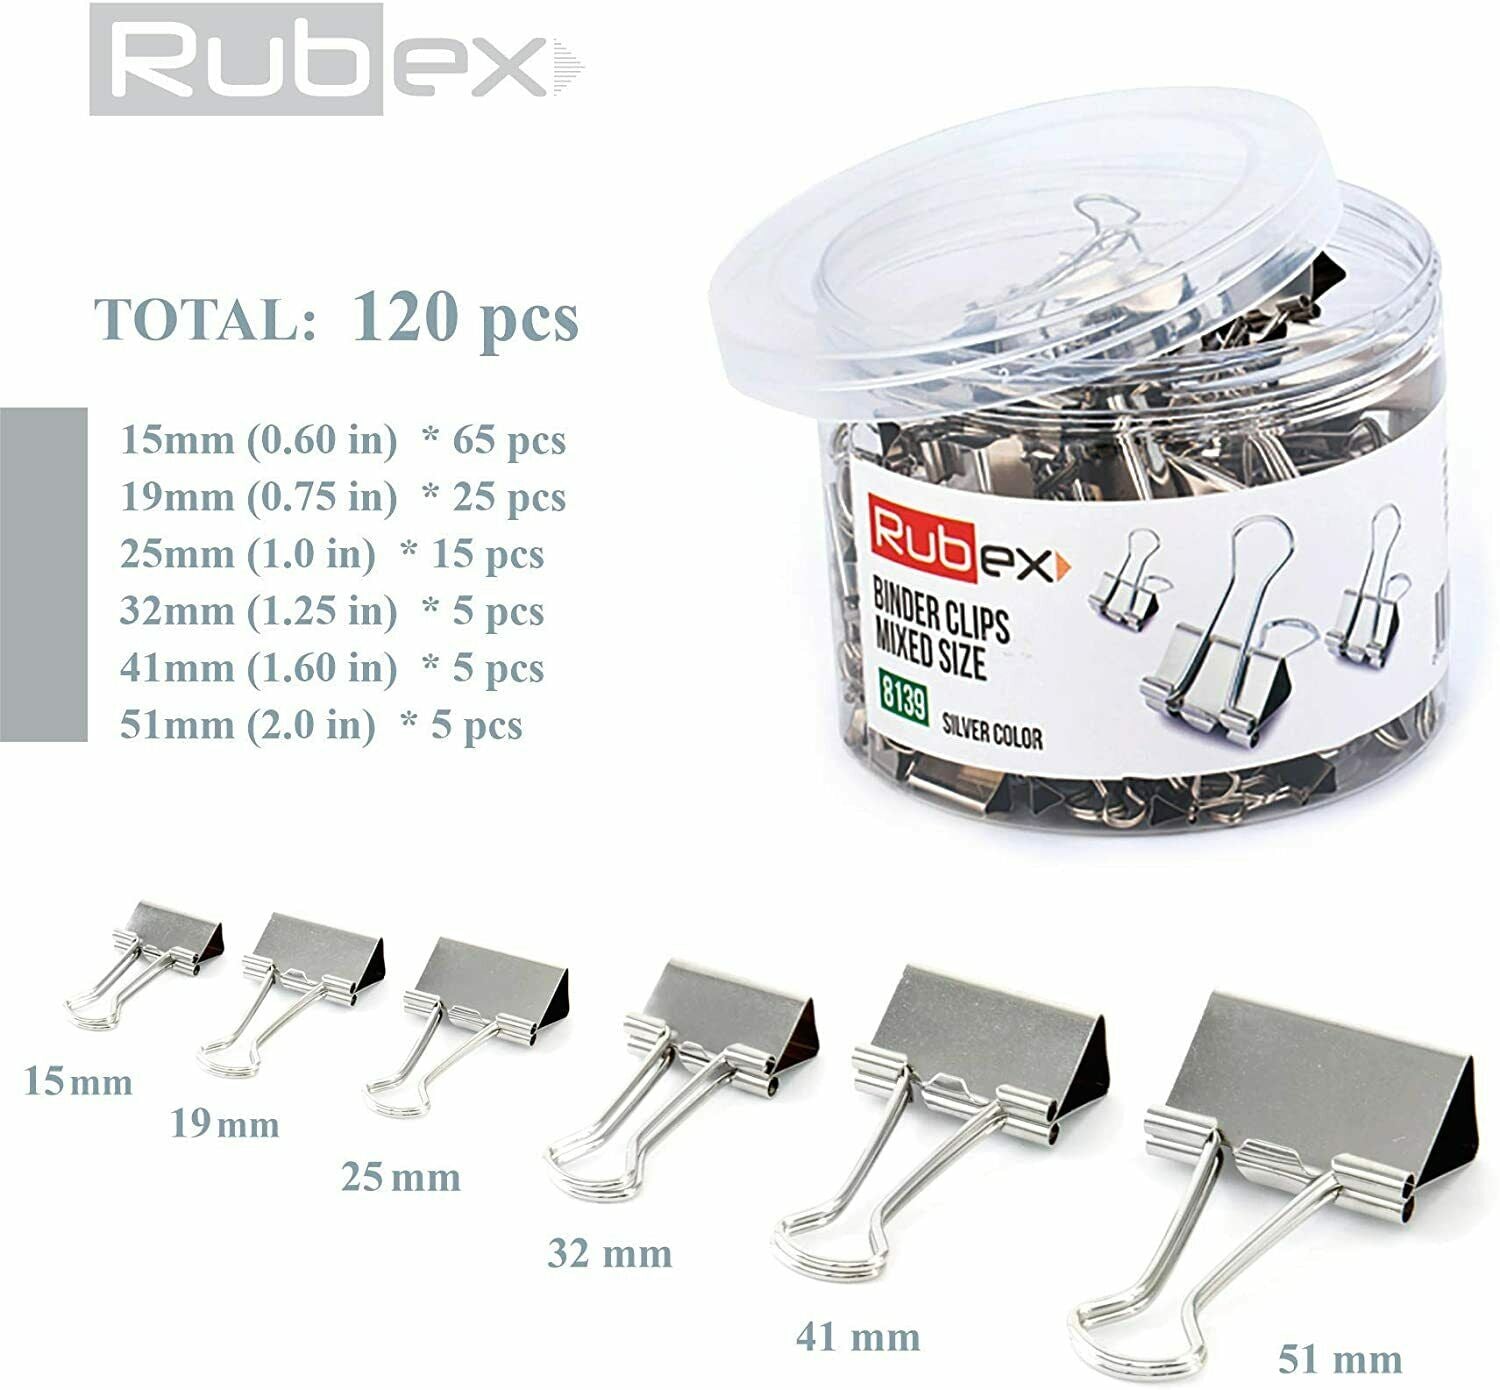 Rubex Binder Clips, Silver Small Medium Large Binder Clips, Jumbo Binder  Clips, Paper Binder Clips, Big Metal Paper Clamps for Notebooks, Envelopes